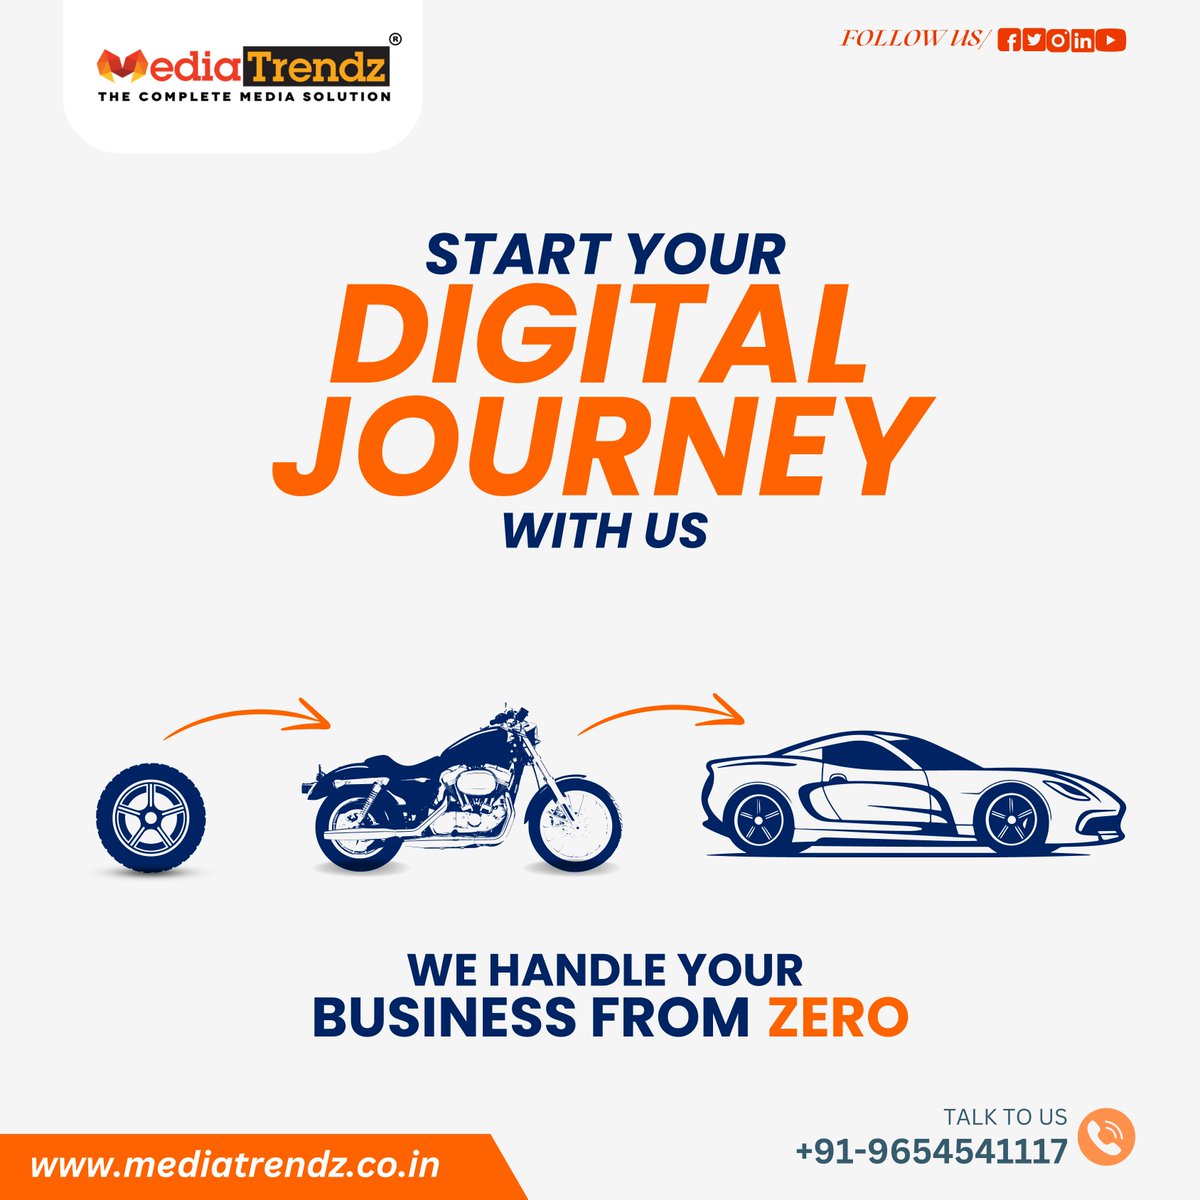 Let's accelerate your online presence from zero to hero, with MediaTrendz igniting the path to digital success. Buckle up for an exhilarating ride ahead!🚴‍♀️➡️🏎️
#DigitalAcceleration #BrandUpgrade #MediaTrendz #DigitalJourney #OnlineTransformation #DriveToSuccess #LevelUpYourBrand